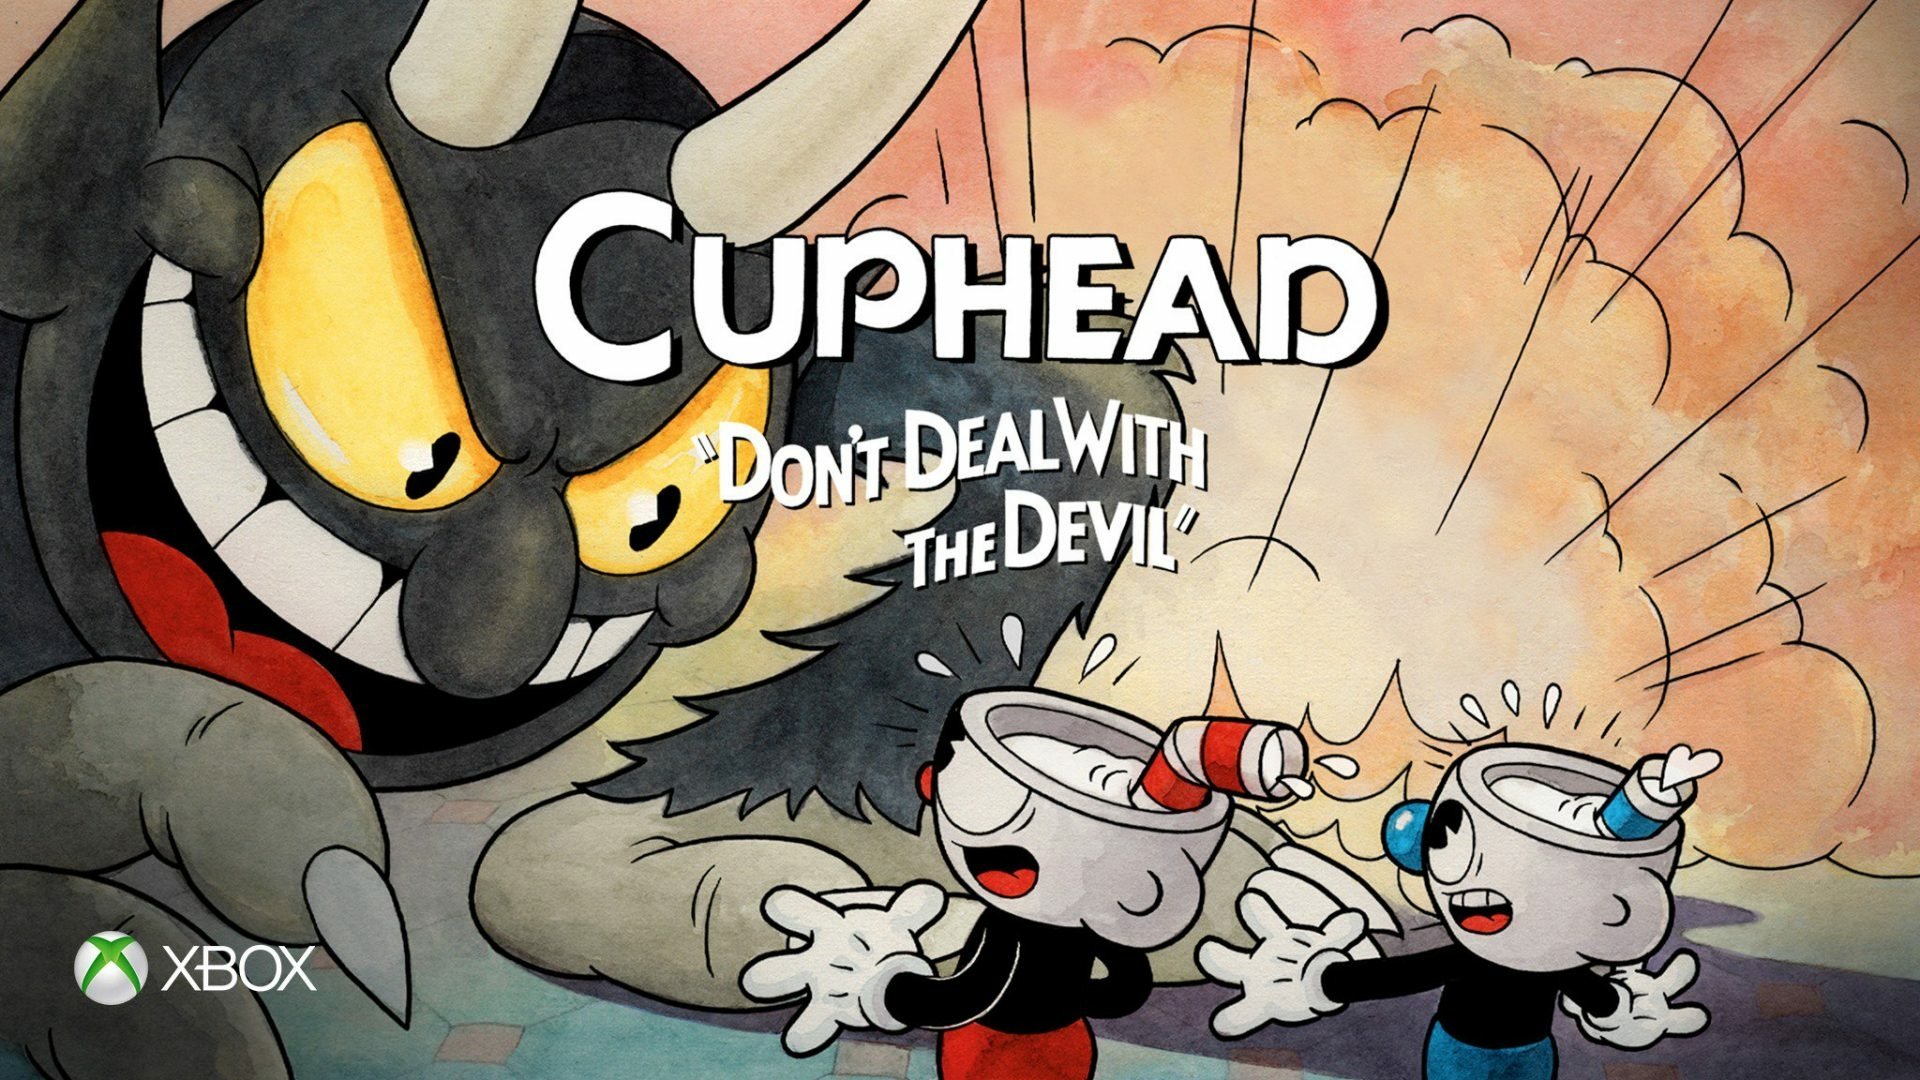 39 Cuphead Hd Wallpapers Background Images Wallpaper Abyss Images, Photos, Reviews